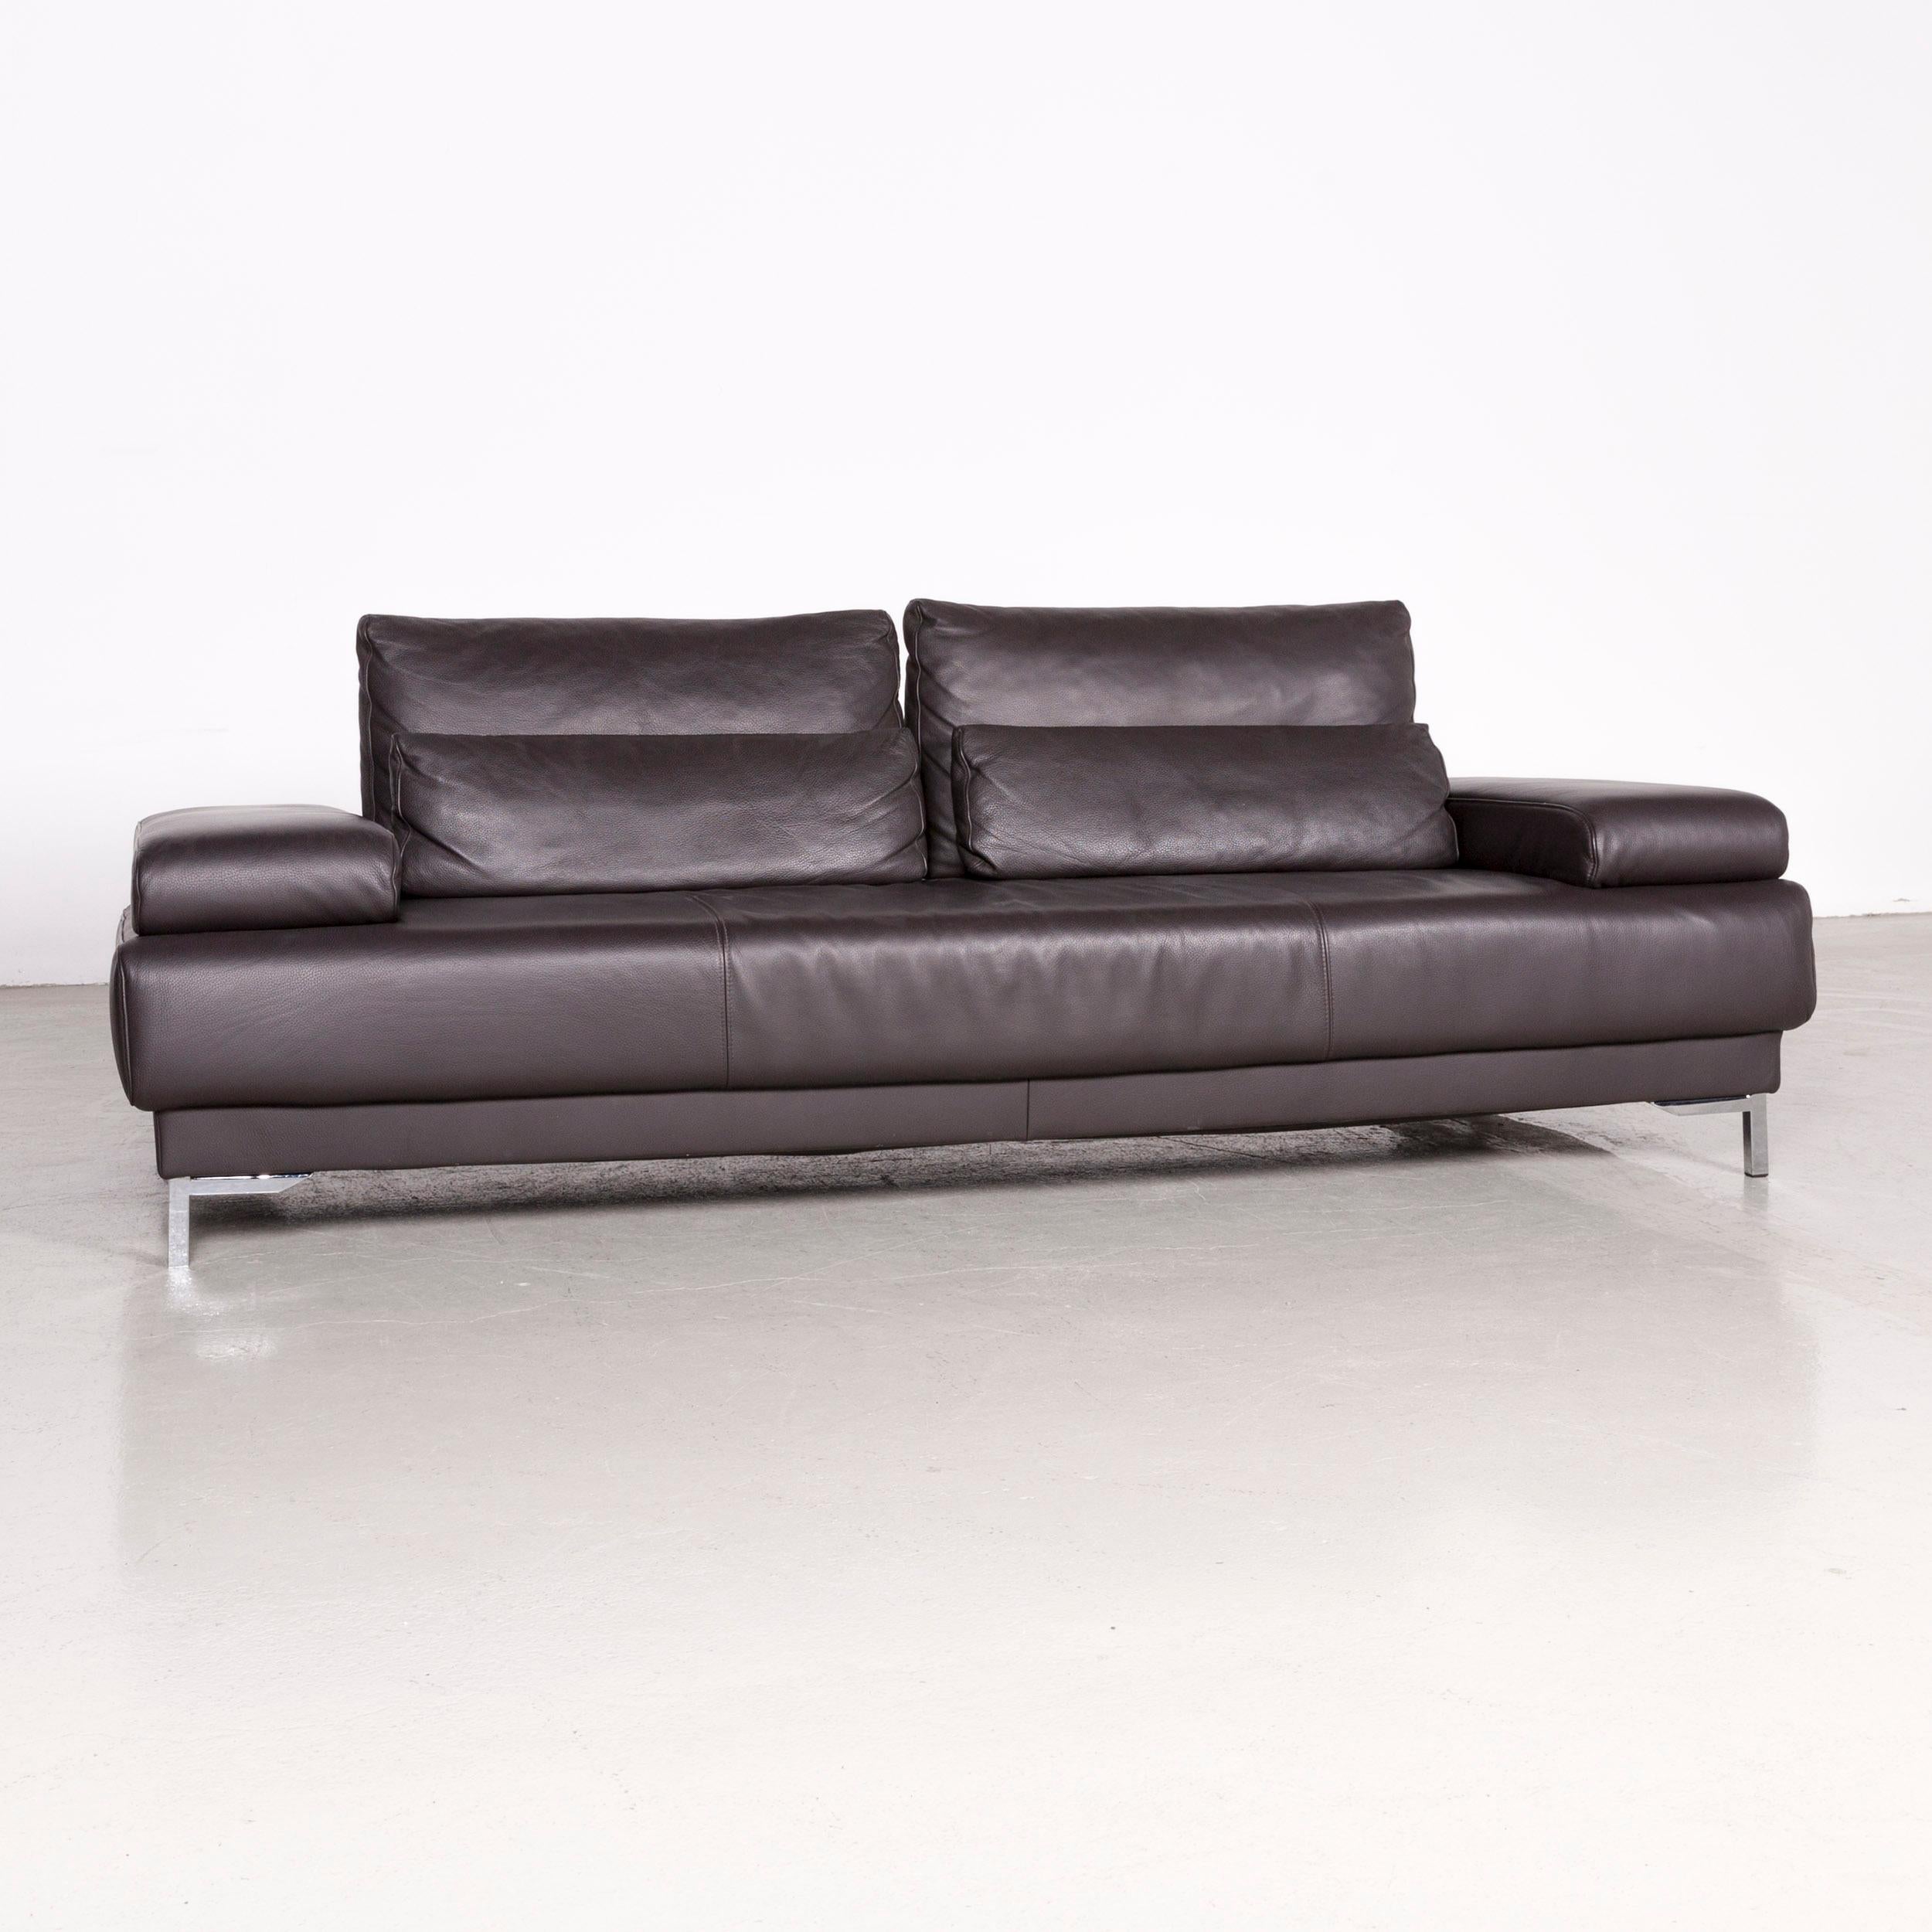 Ewald Schillig Harry Designer Sofa Footstool Set Leather Brown Three-Seat Couch In Good Condition For Sale In Cologne, DE